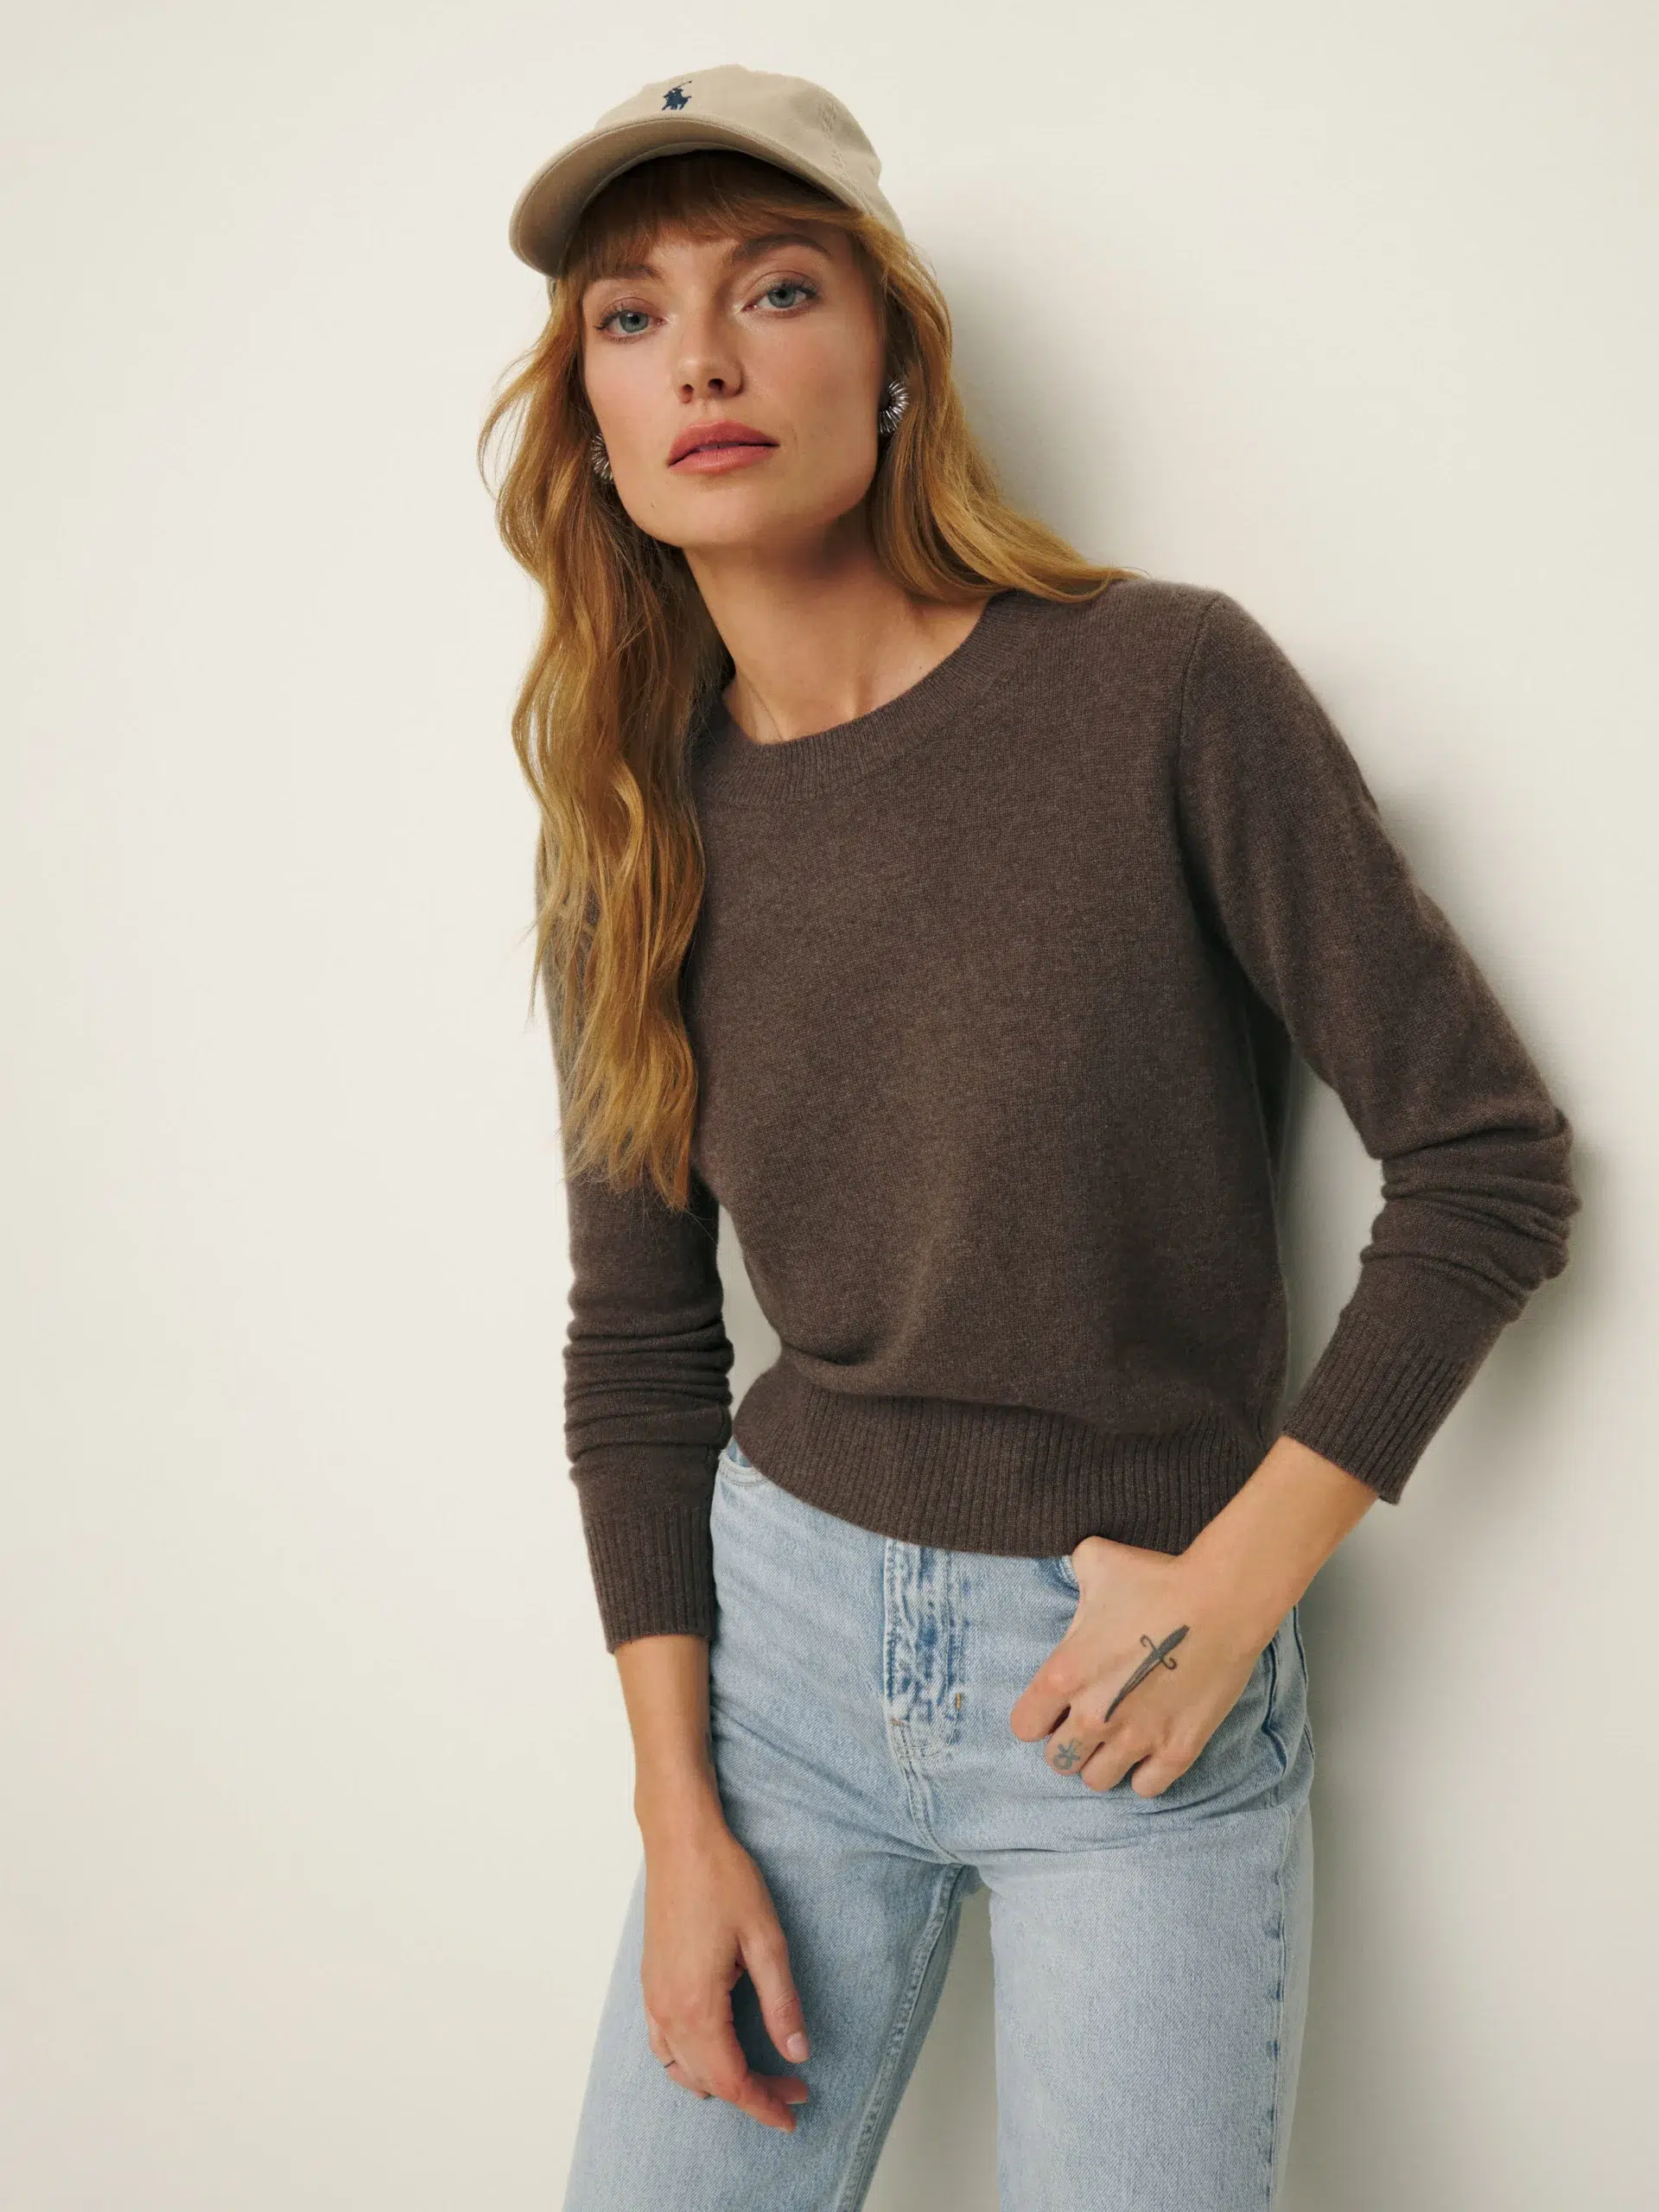 Woman in a brown sweater and blue jeans posing with her hand on her hip and wearing a beige cap.